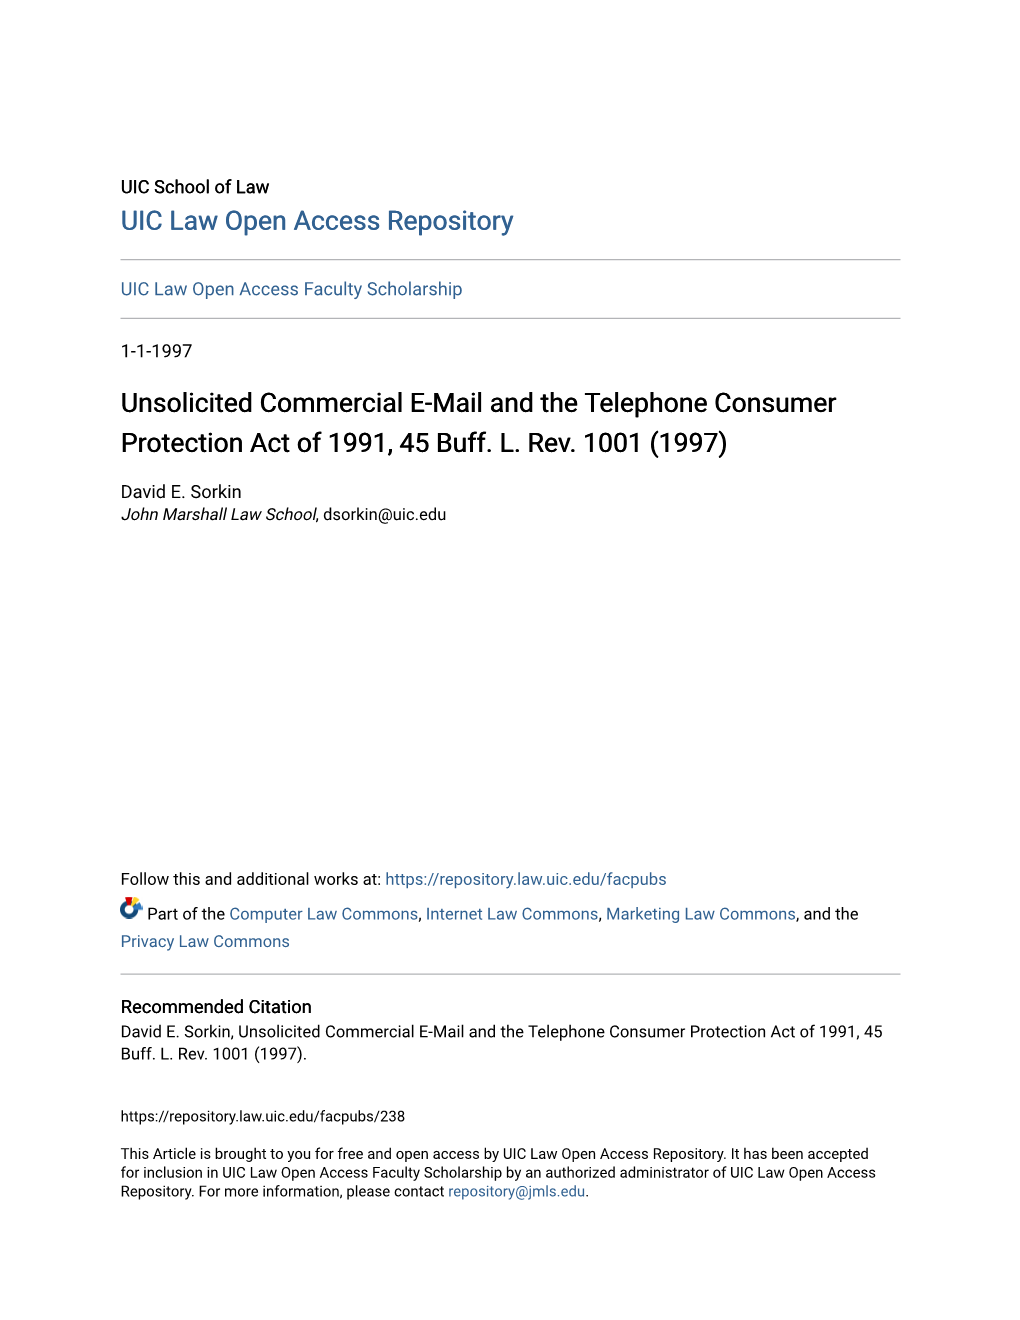 Unsolicited Commercial E-Mail and the Telephone Consumer Protection Act of 1991, 45 Buff